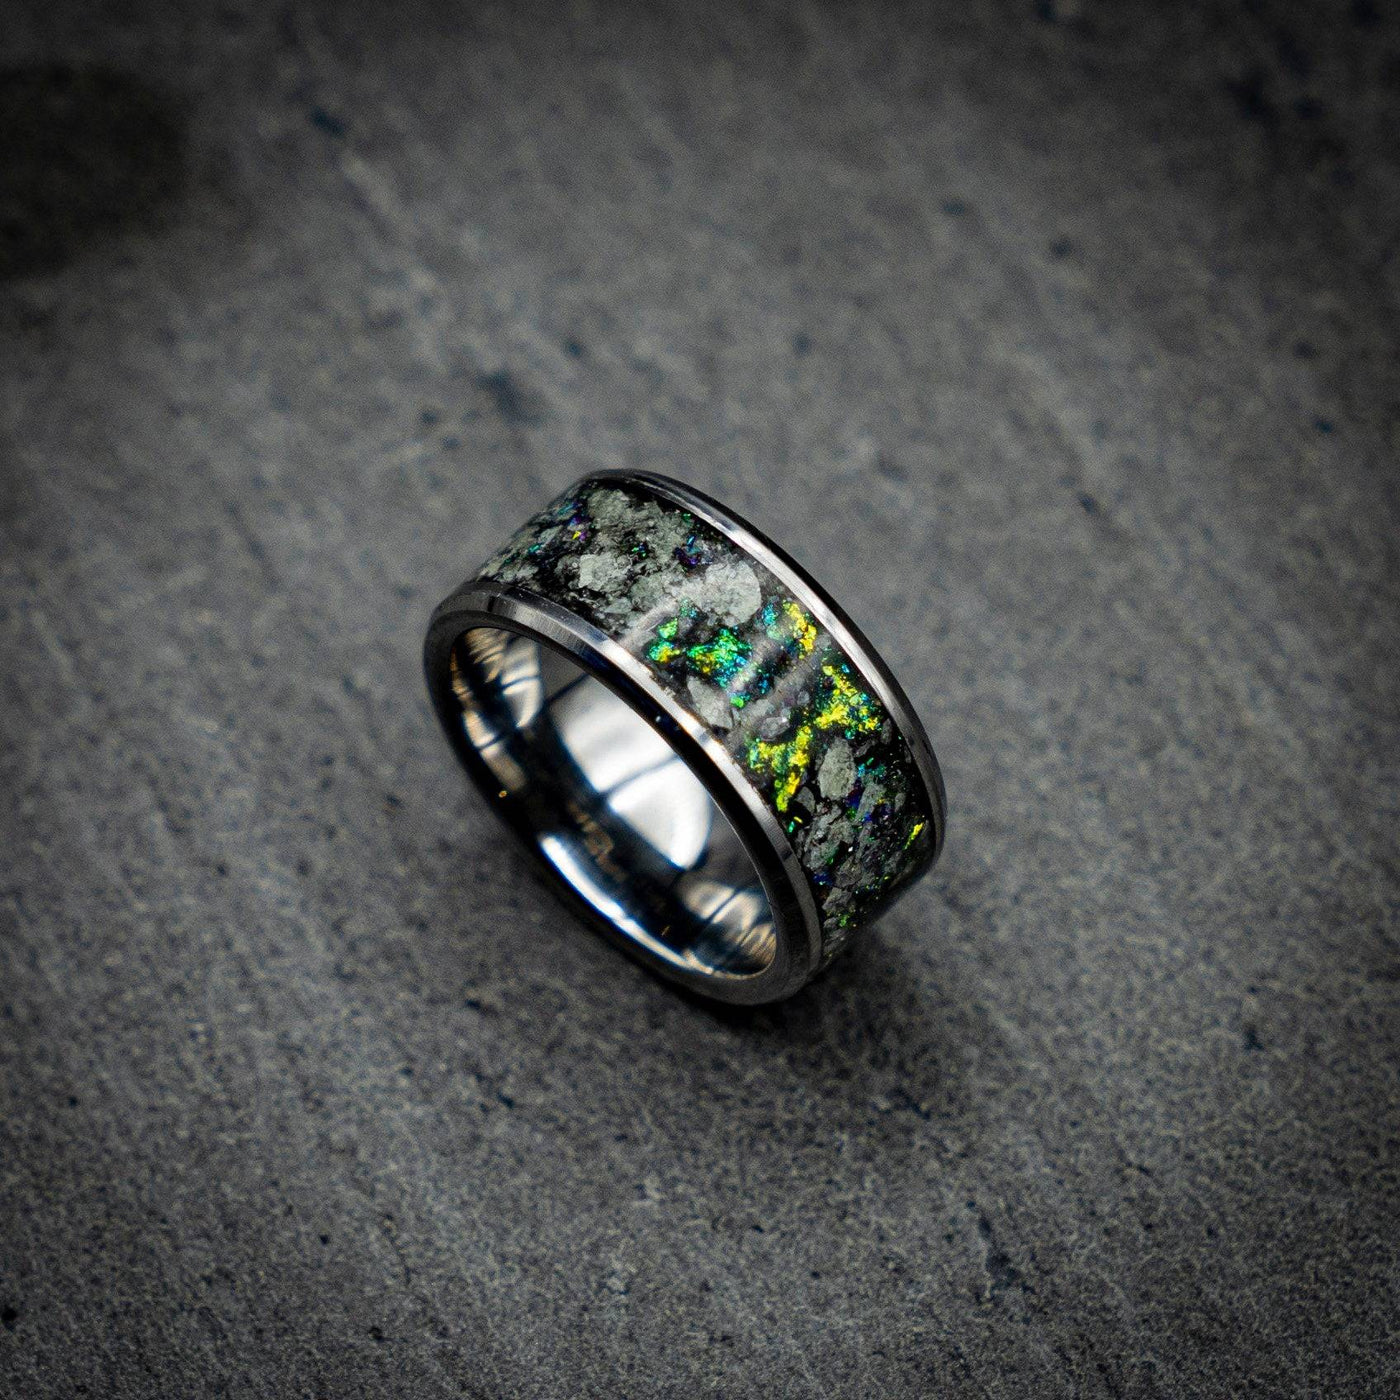 Tungsten ring with green chameleon flakes and green glow stones